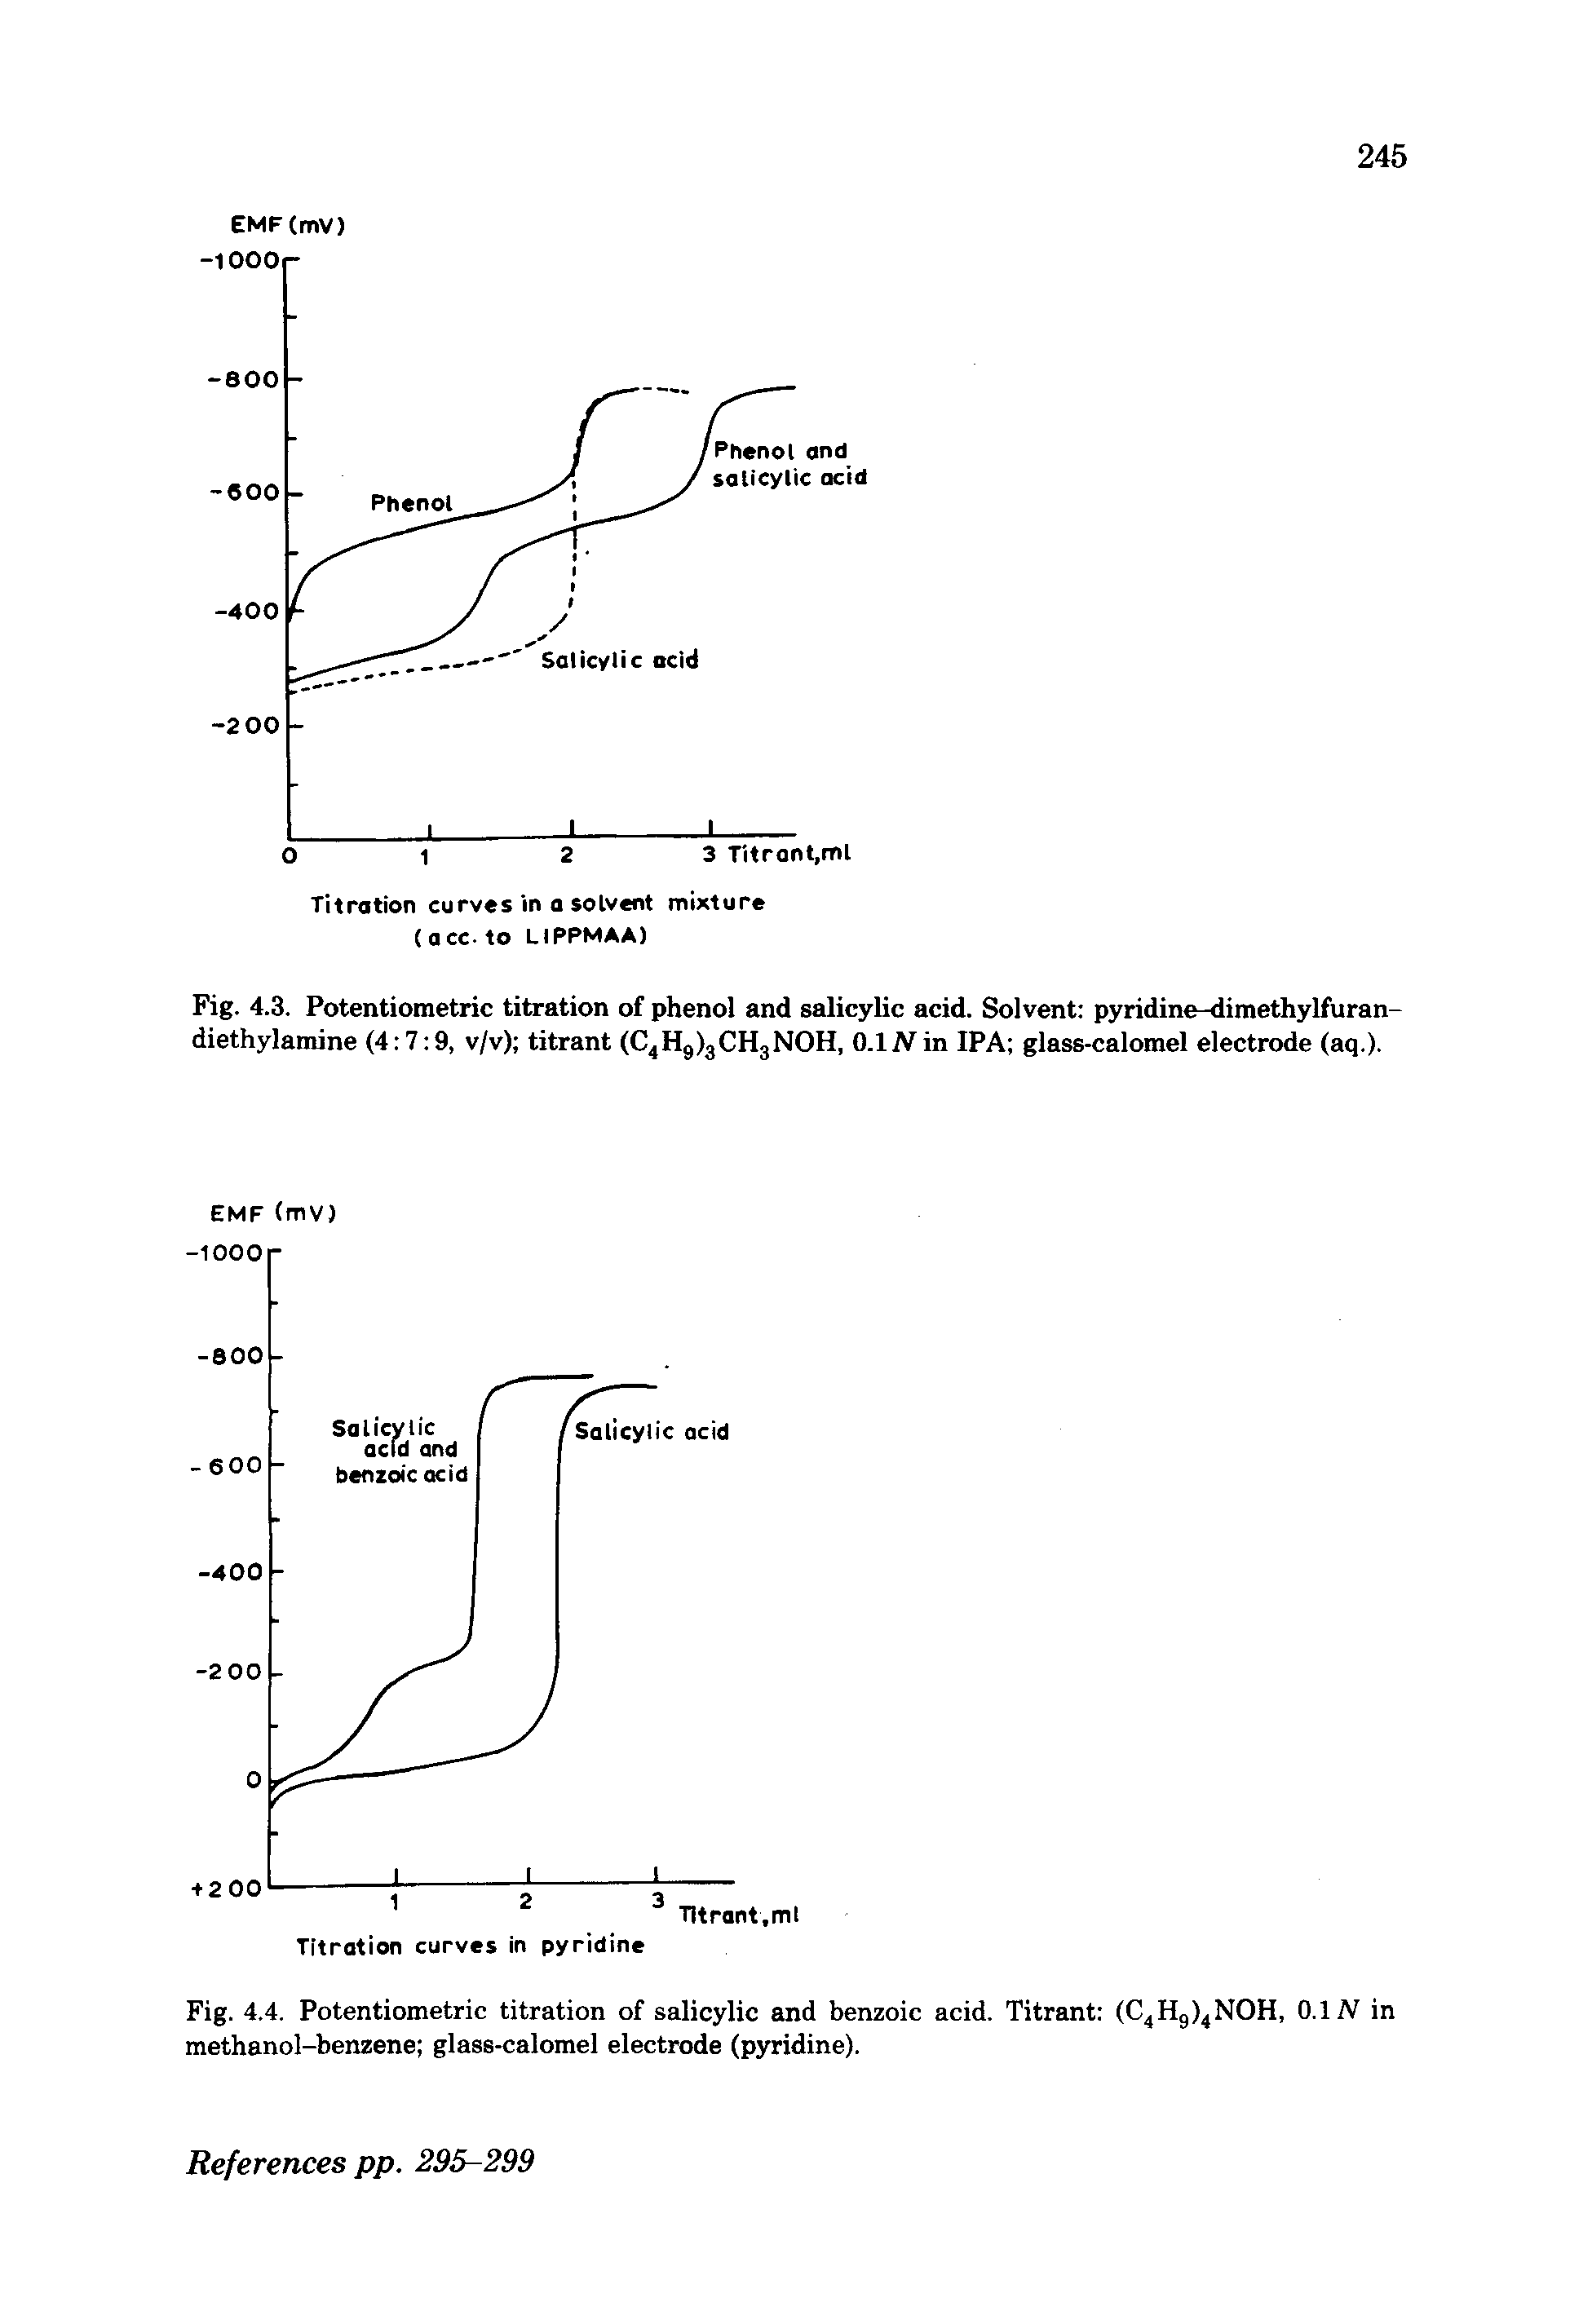 Fig. 4.4. Potentiometric titration of salicylic and benzoic acid. Titrant (C4H9)4NOH, 0.1 A in methanol-benzene glass-calomel electrode (pyridine).